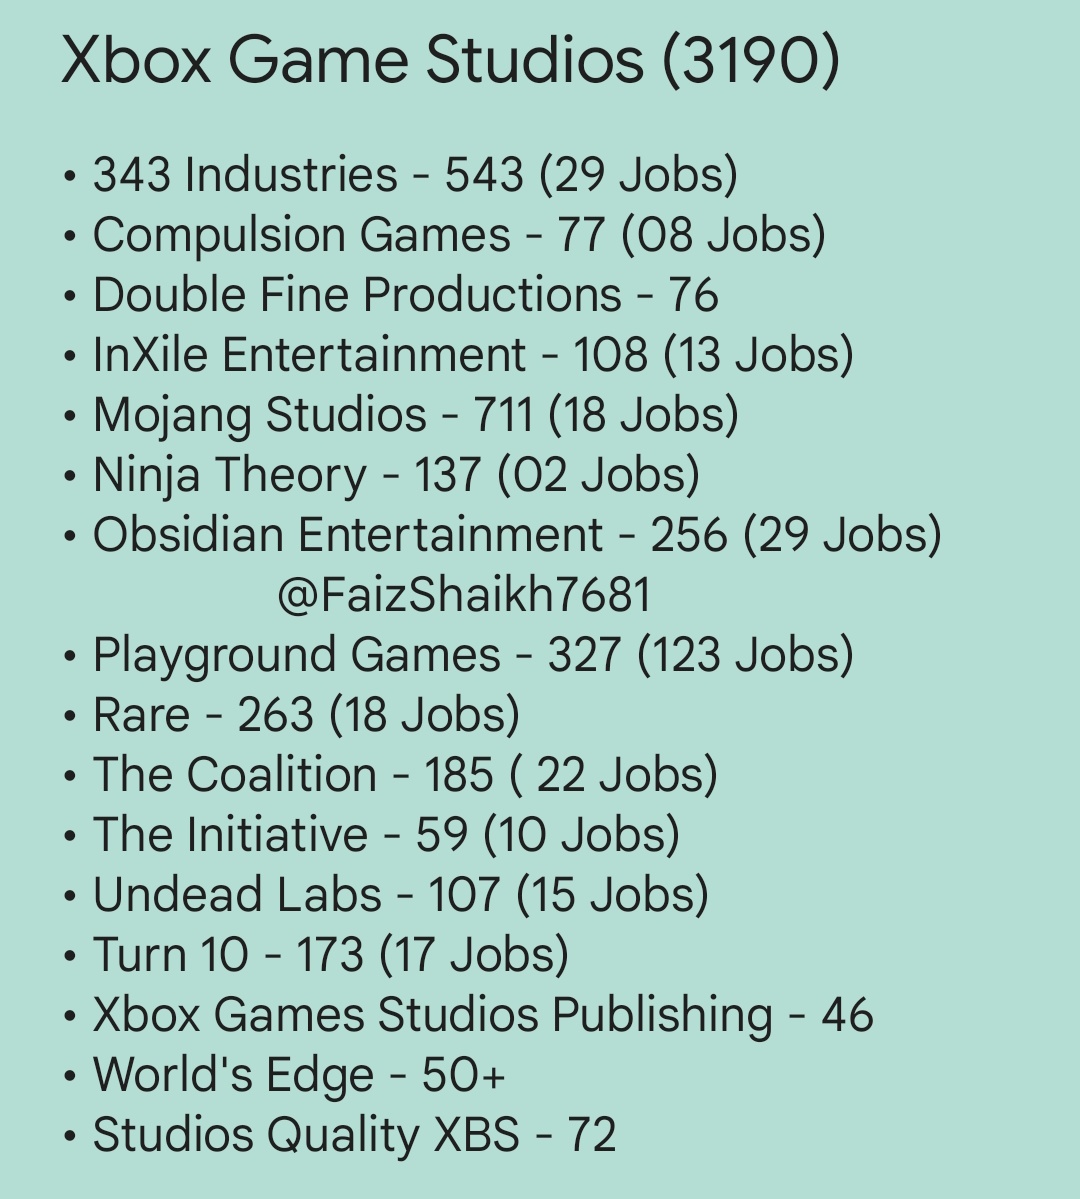 Faizan Shaikh on X: Number of Employees only based on LinkedIn (Number  maybe more/less) Total ~18,998 • Microsoft Gaming • Activision Publishing  (2945 + 1615) Bethesda Softworks (3151) Blizzard Entertainment (5133) King (